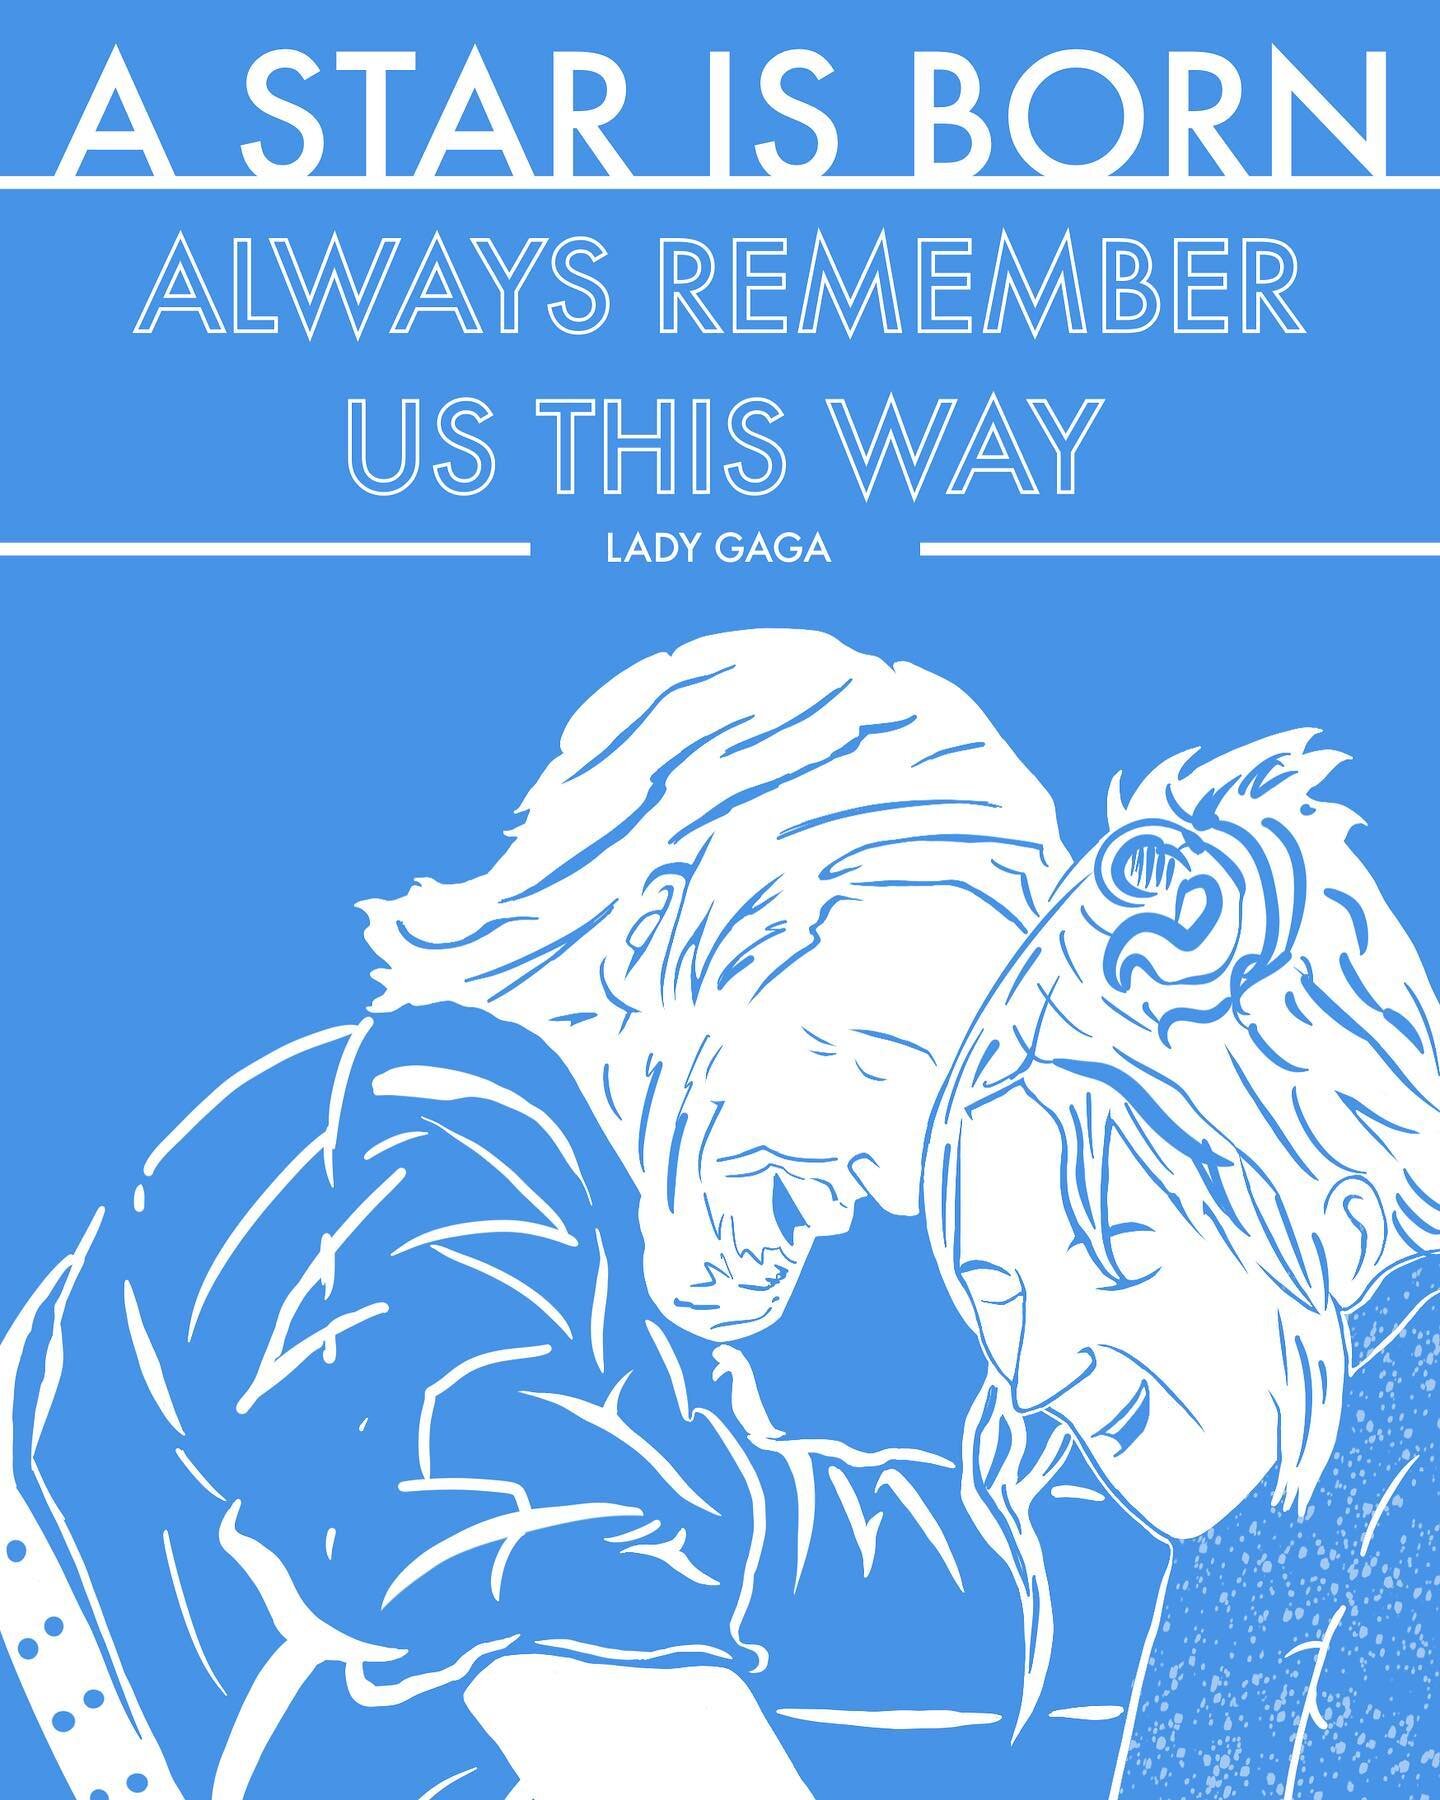 Another commissioned piece inspired by a song as #comic covers - this one is inspired by Always Remember Us This Way by Lady Gaga! @ladygaga

#ladygaga #bradleycopper #rememberusthisway #astarisborn #song #comic #comicart #comiccover #covers #illustr